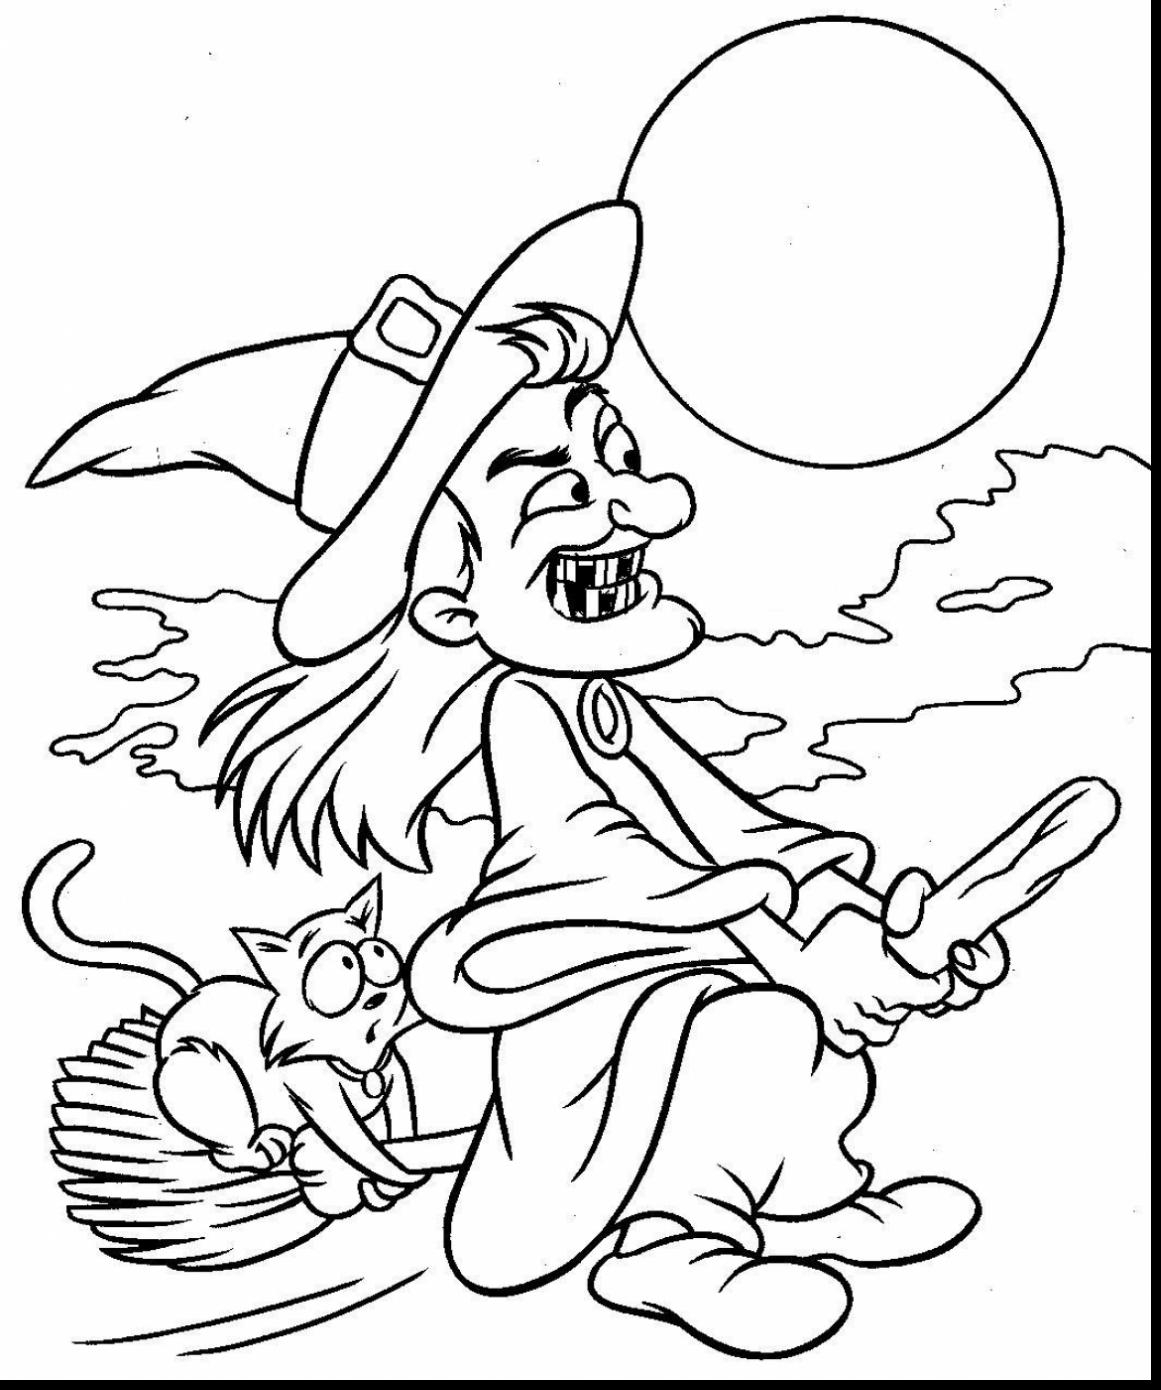 Witch Coloring Pages For Adults at GetDrawings | Free download